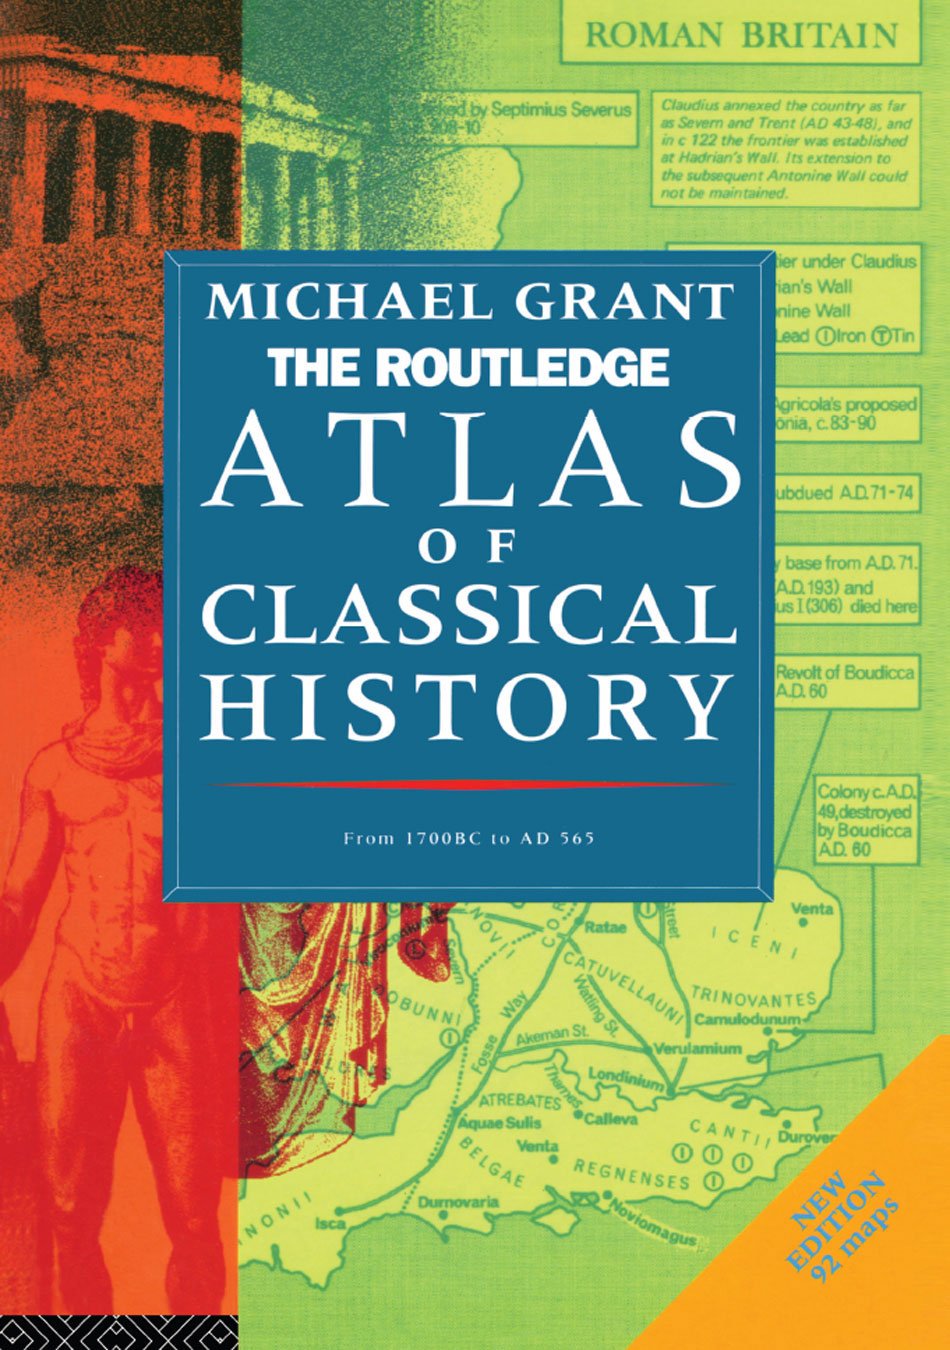 The Routledge Atlas of Classical History: From 1700 BC to AD 565 ... - U4ZVvO6g02vvoU8QyWe5oMpCBcX2ewJL